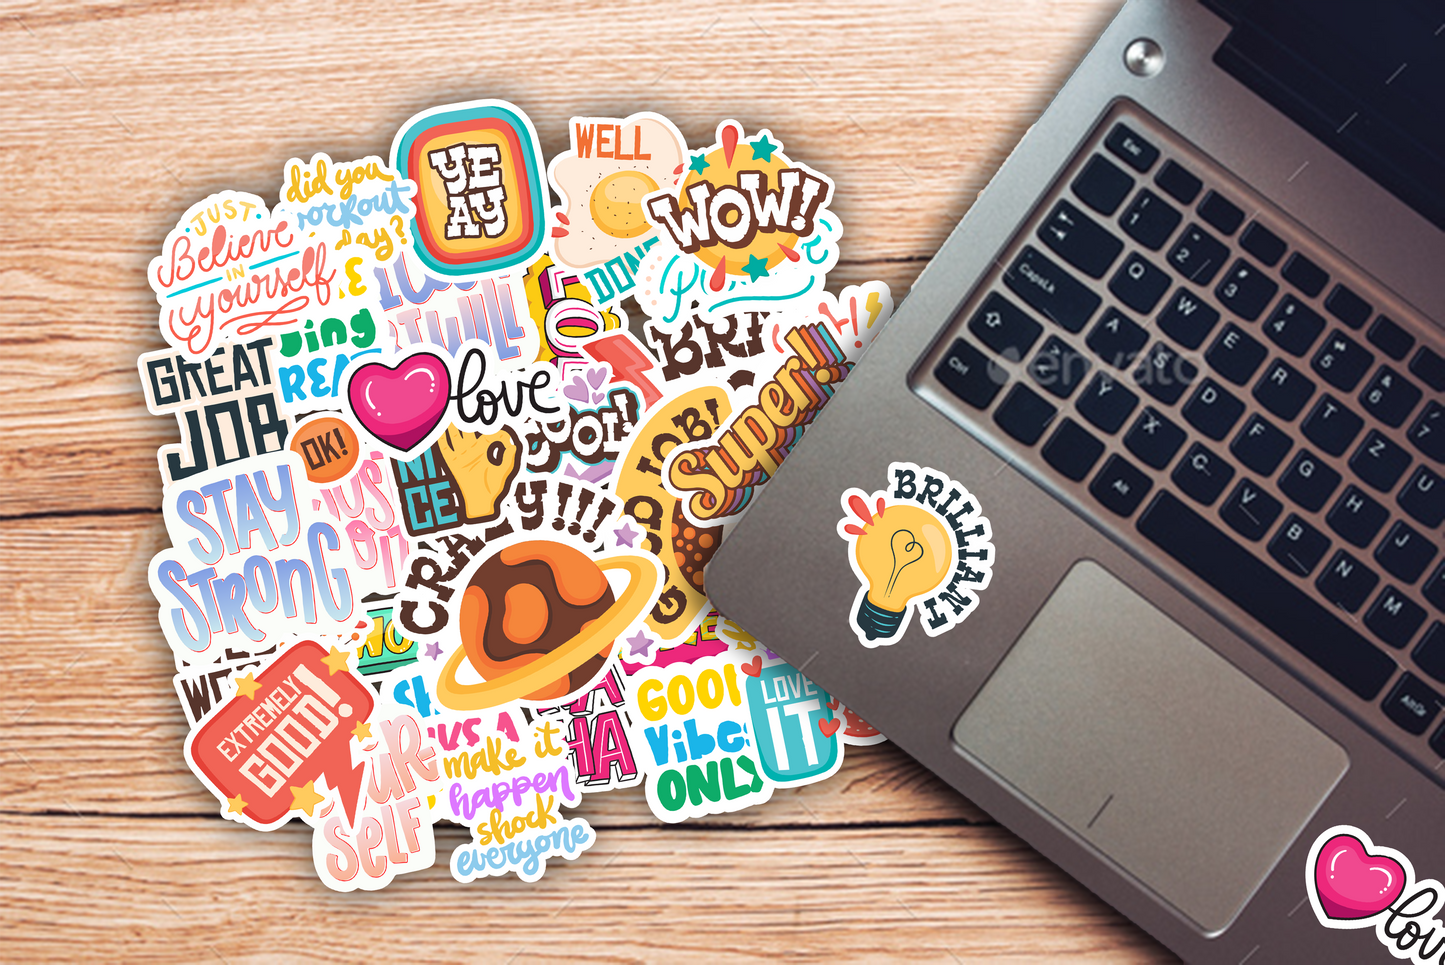 iberry's 50 pcs Stickers for Laptop Mobile Phones Computer Bicycle Luggage Scrapbooks Gadgets Waterproof Stickers|Sticker with Quotes|Motivational Quote Stickers|Laptop Sticker-Set of 50 Stickers (04)